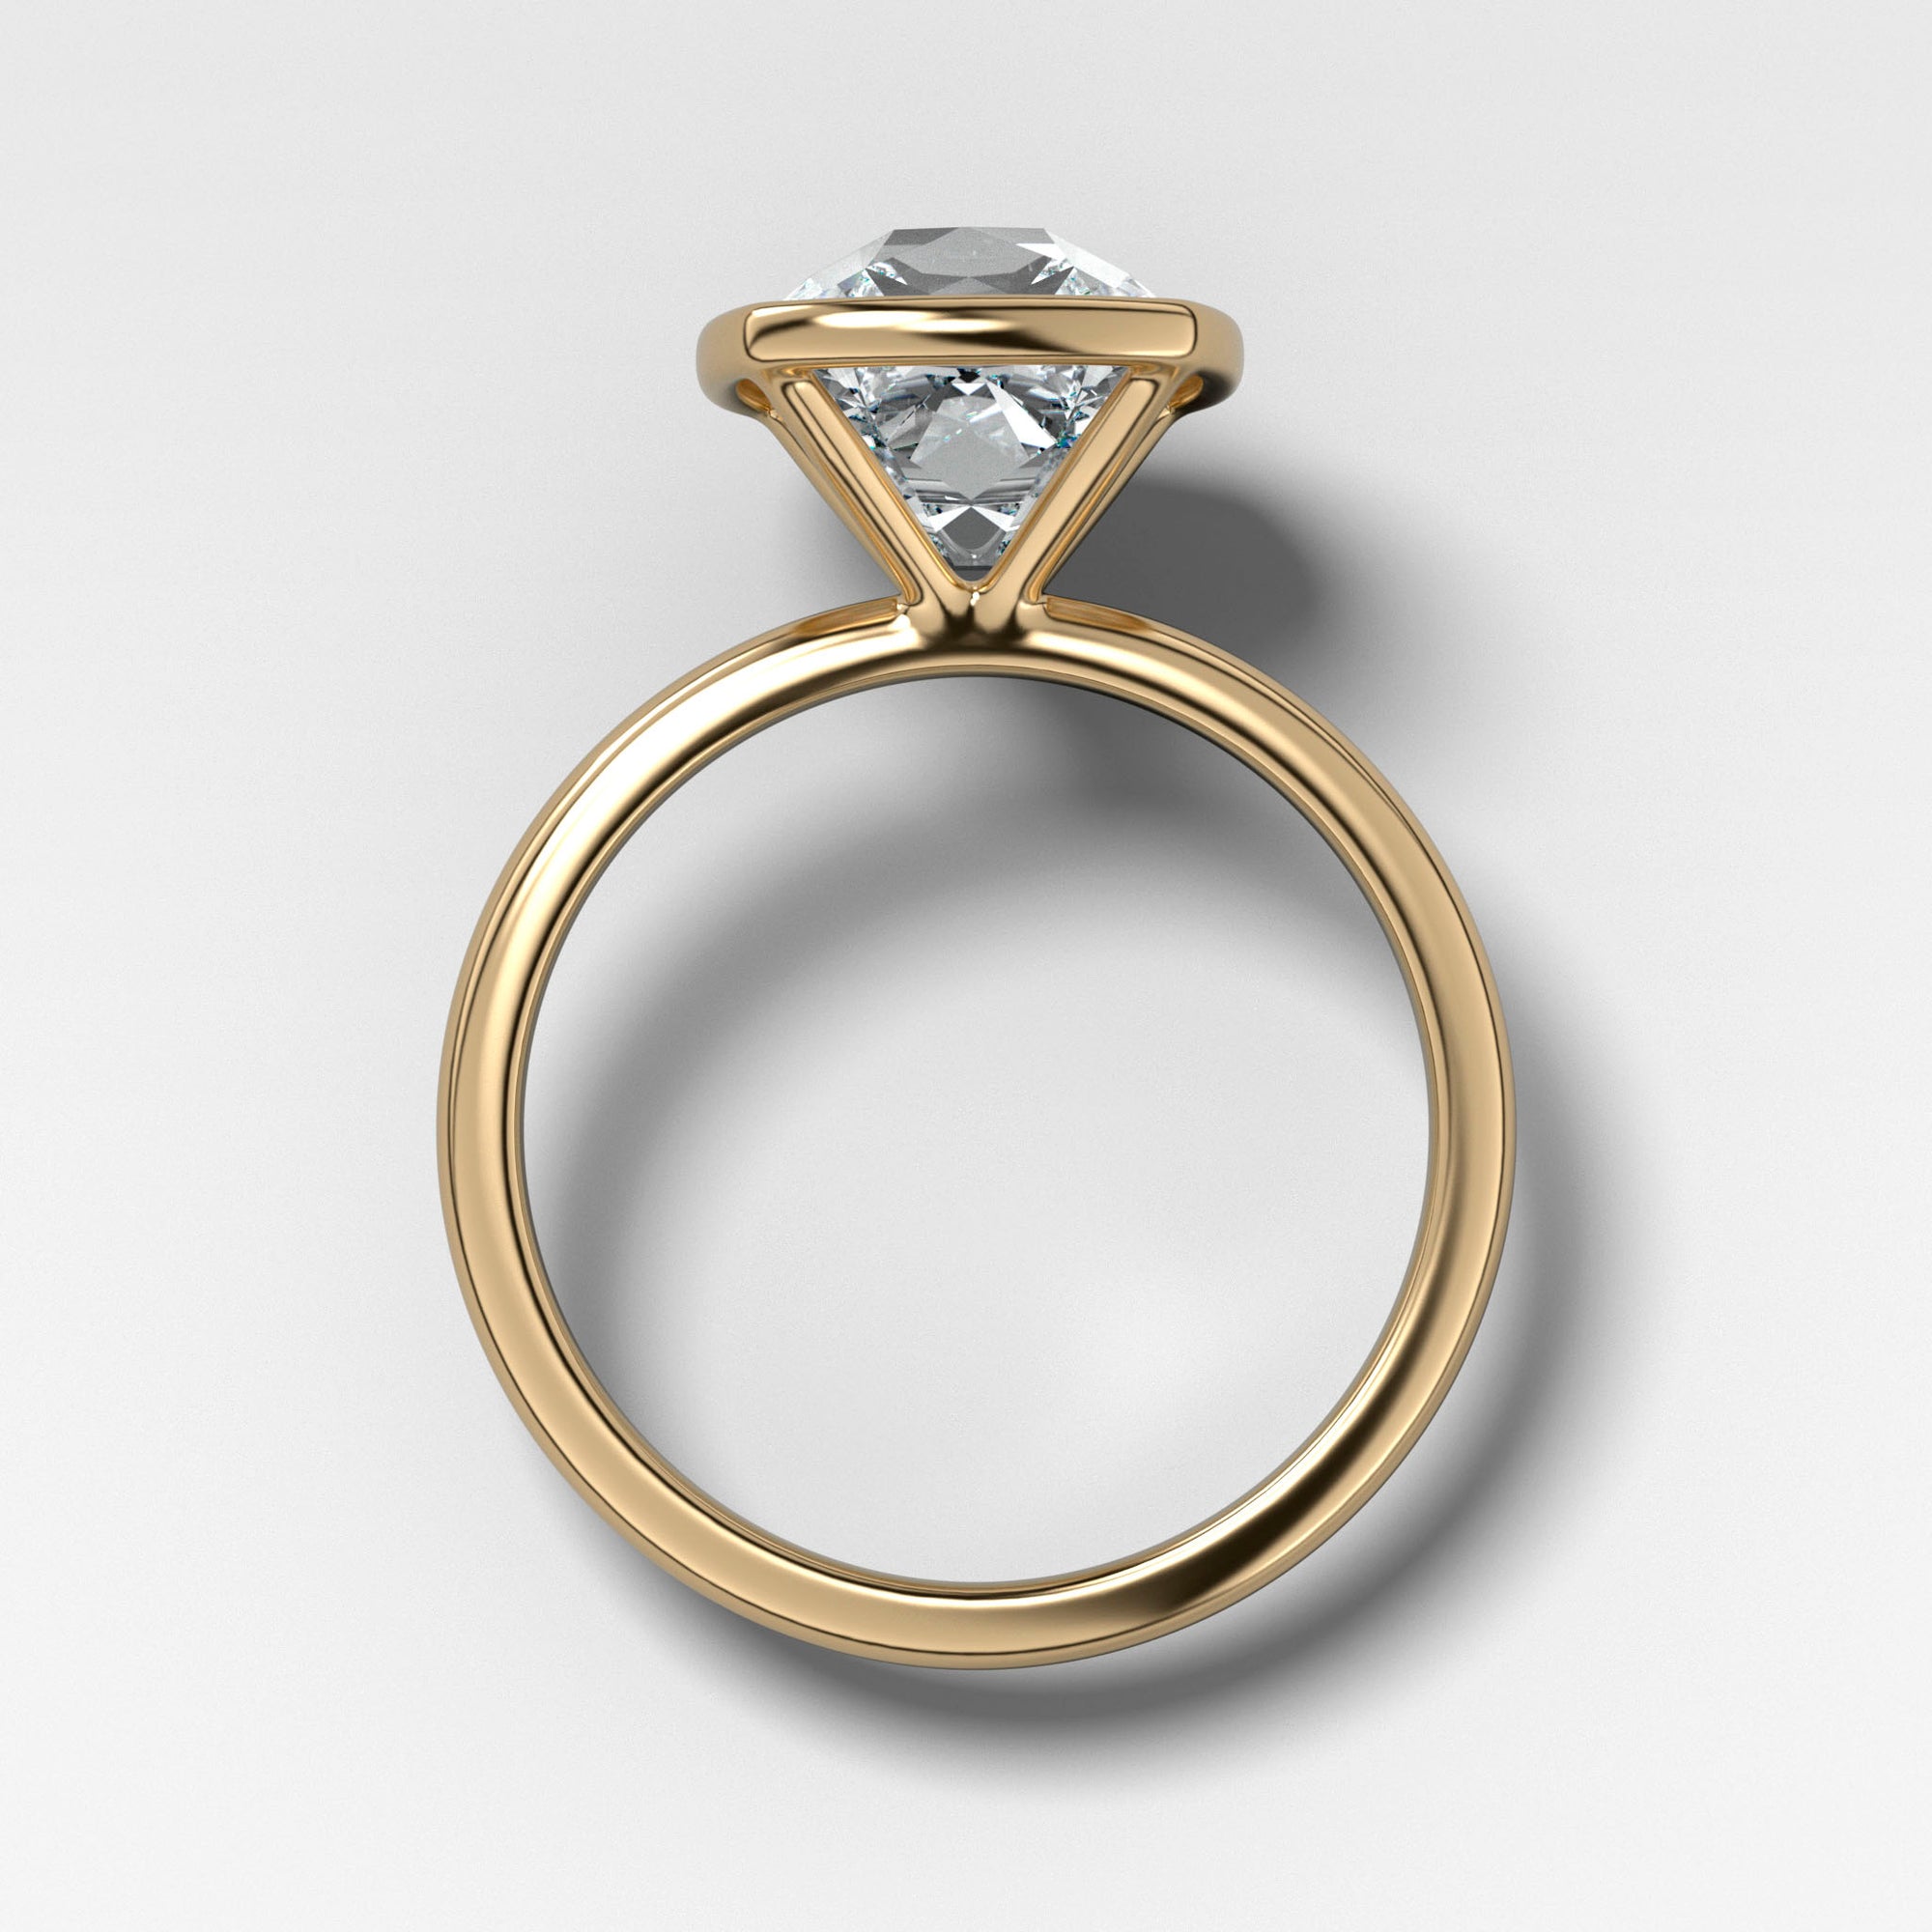 Bezel Penumbra Solitaire With Old Mine Cut by Good Stone in Yellow Gold